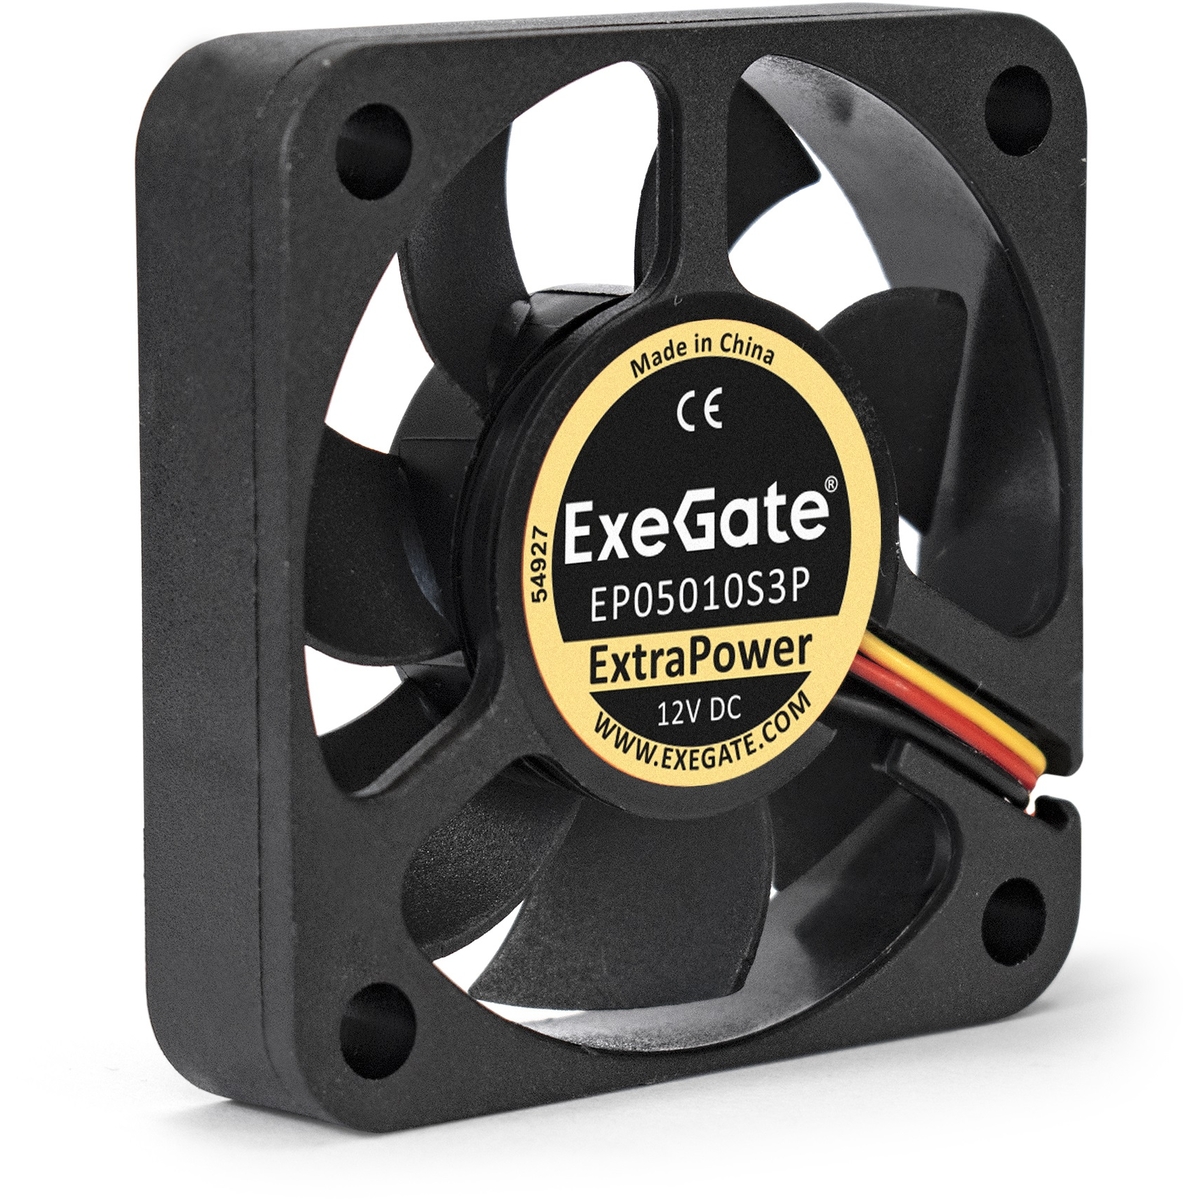  ExeGate ExtraPower EP05010S3P